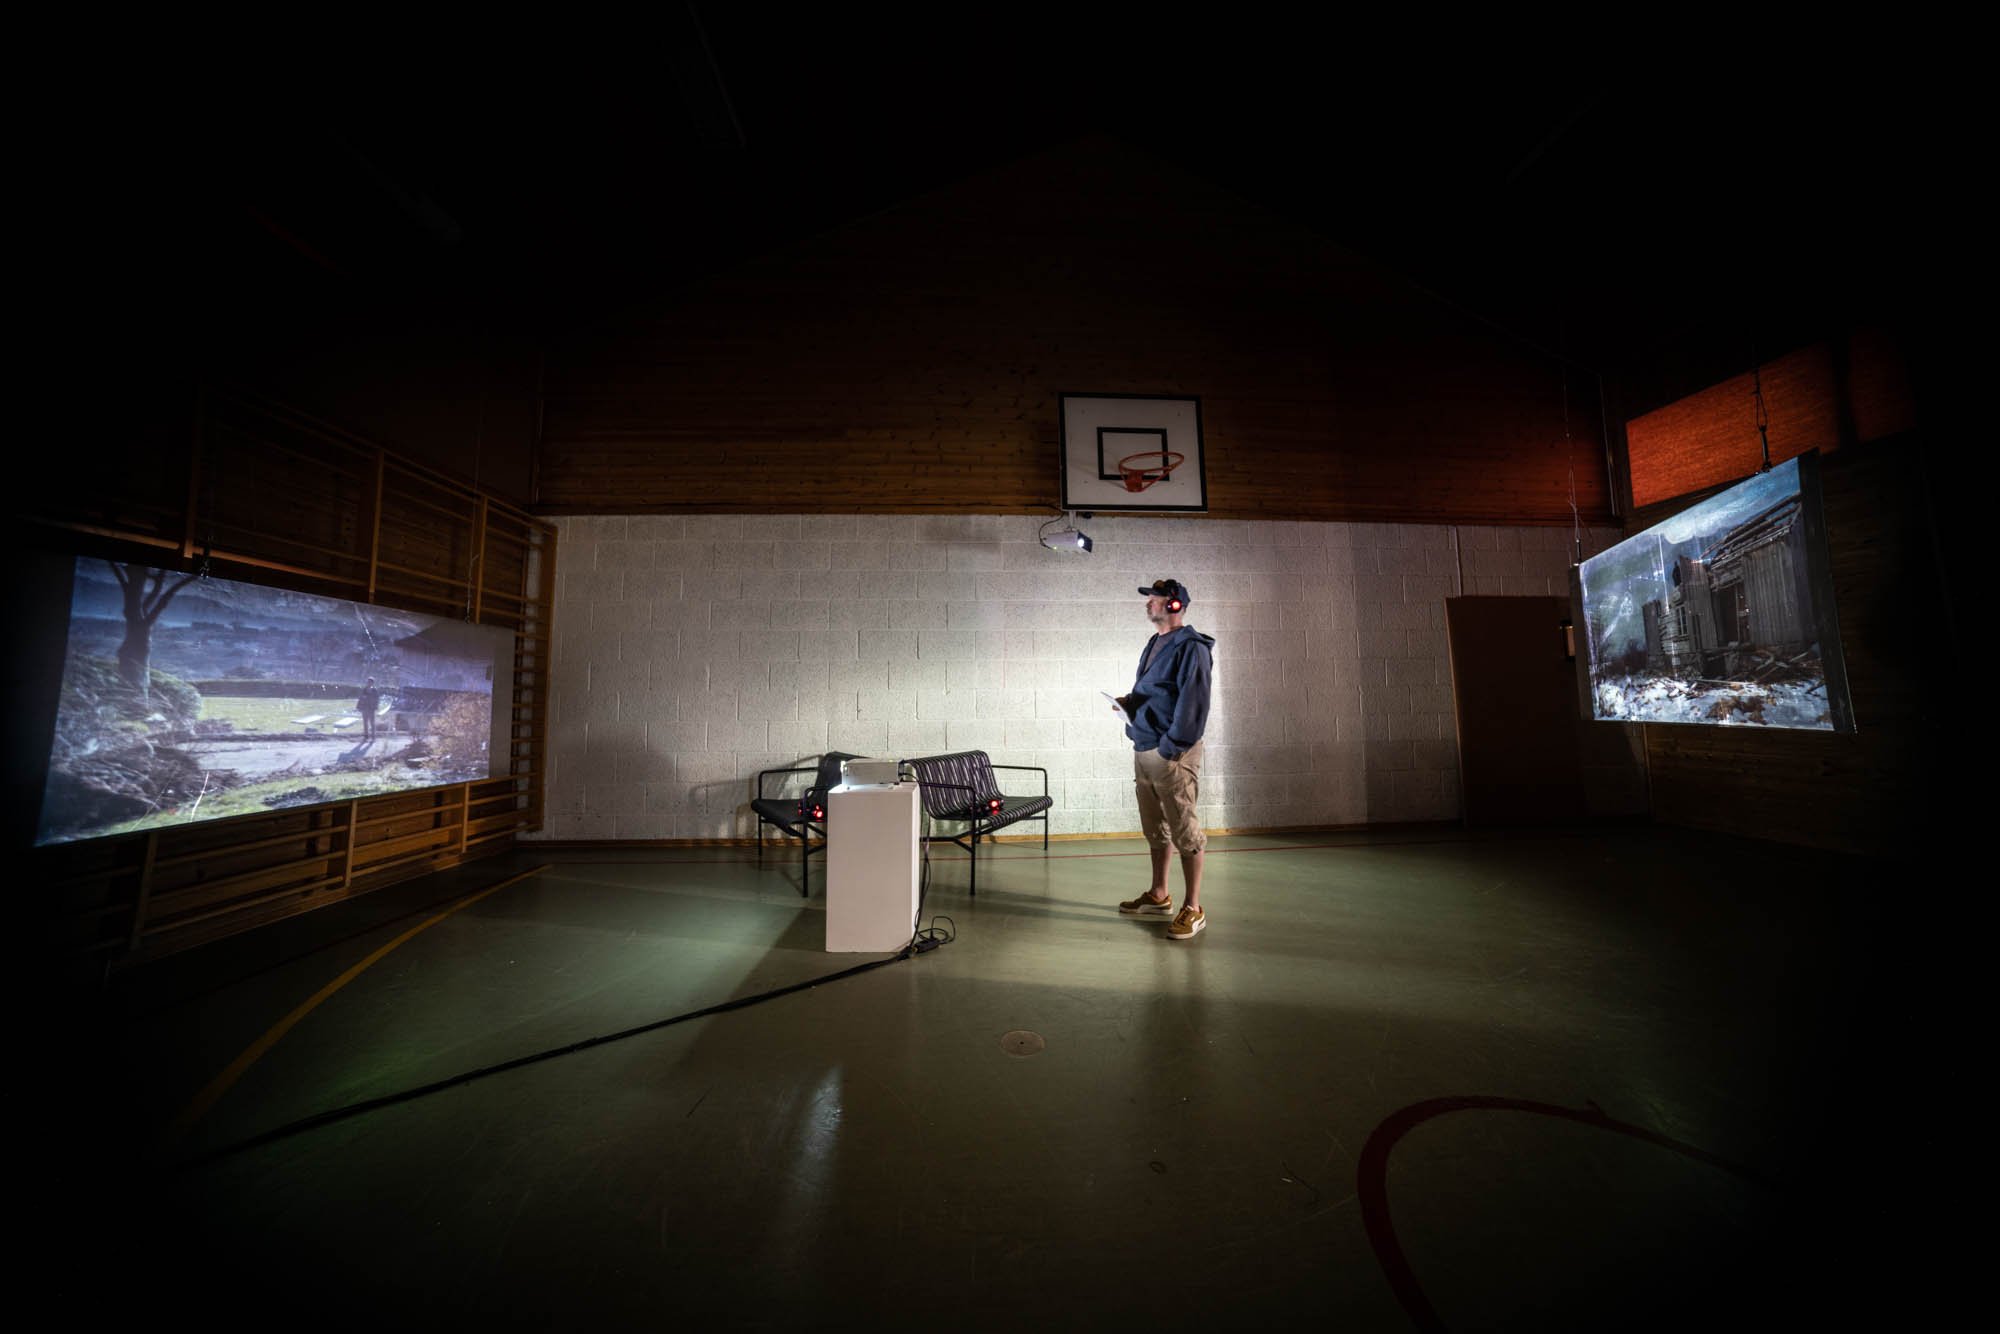   En Skuespillers Arbeid Med Seg Selv,  two channel video by Gustav O Gunvaldsen, installed in the Gym room at the old  primary school in Kabelvåg, Lofoten which was the location for the NKFS degree show 2022. Photo by NKFS. 